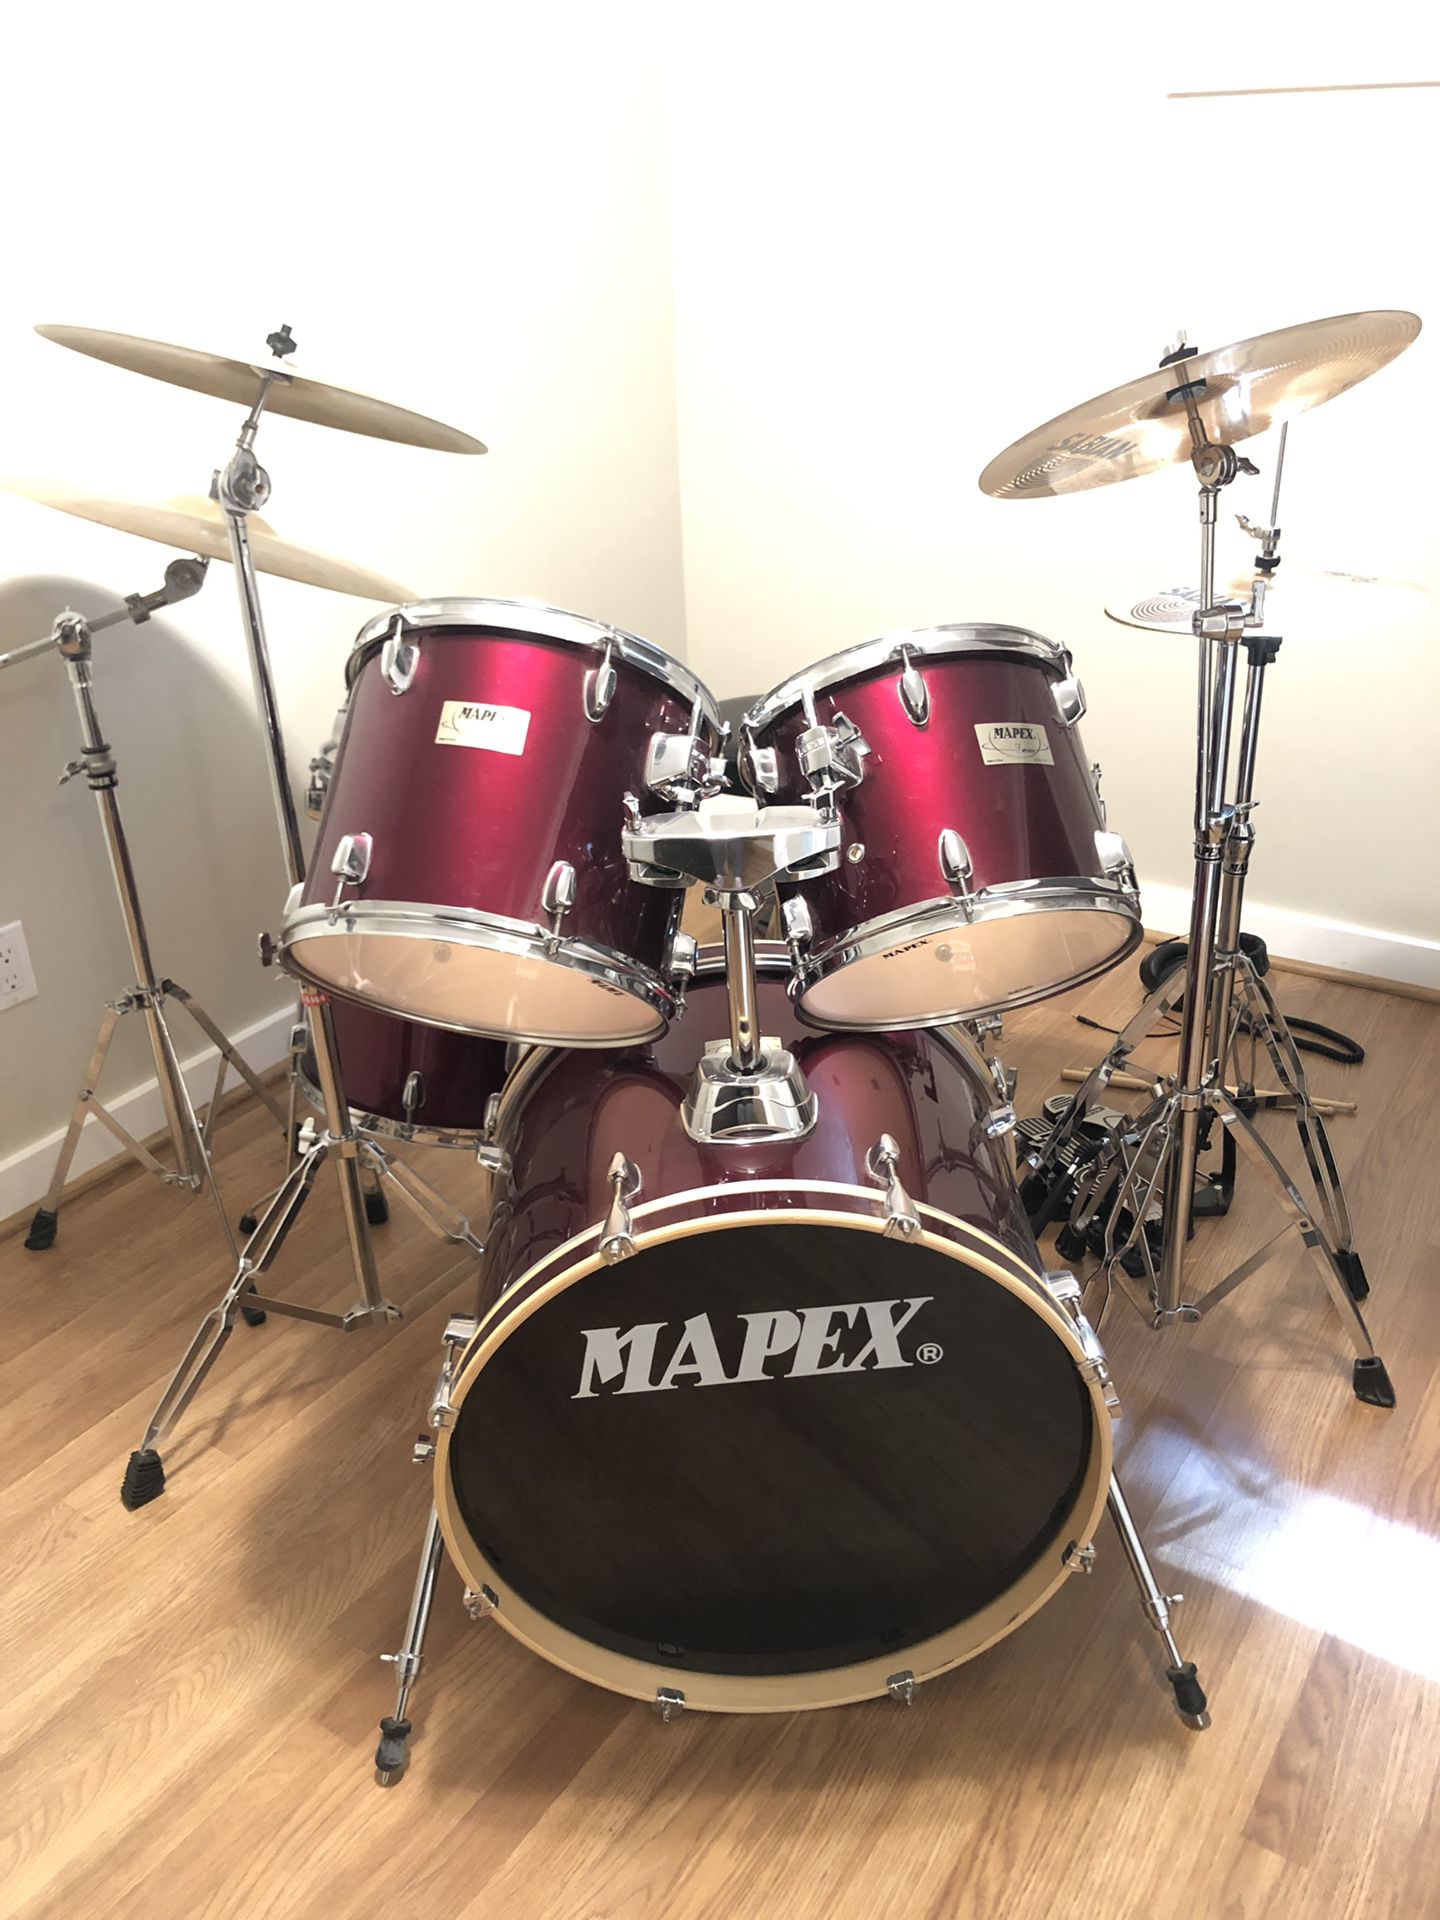 Mapex 5 Piece Drum Set w/ Sabian Cymbals and Stands Included